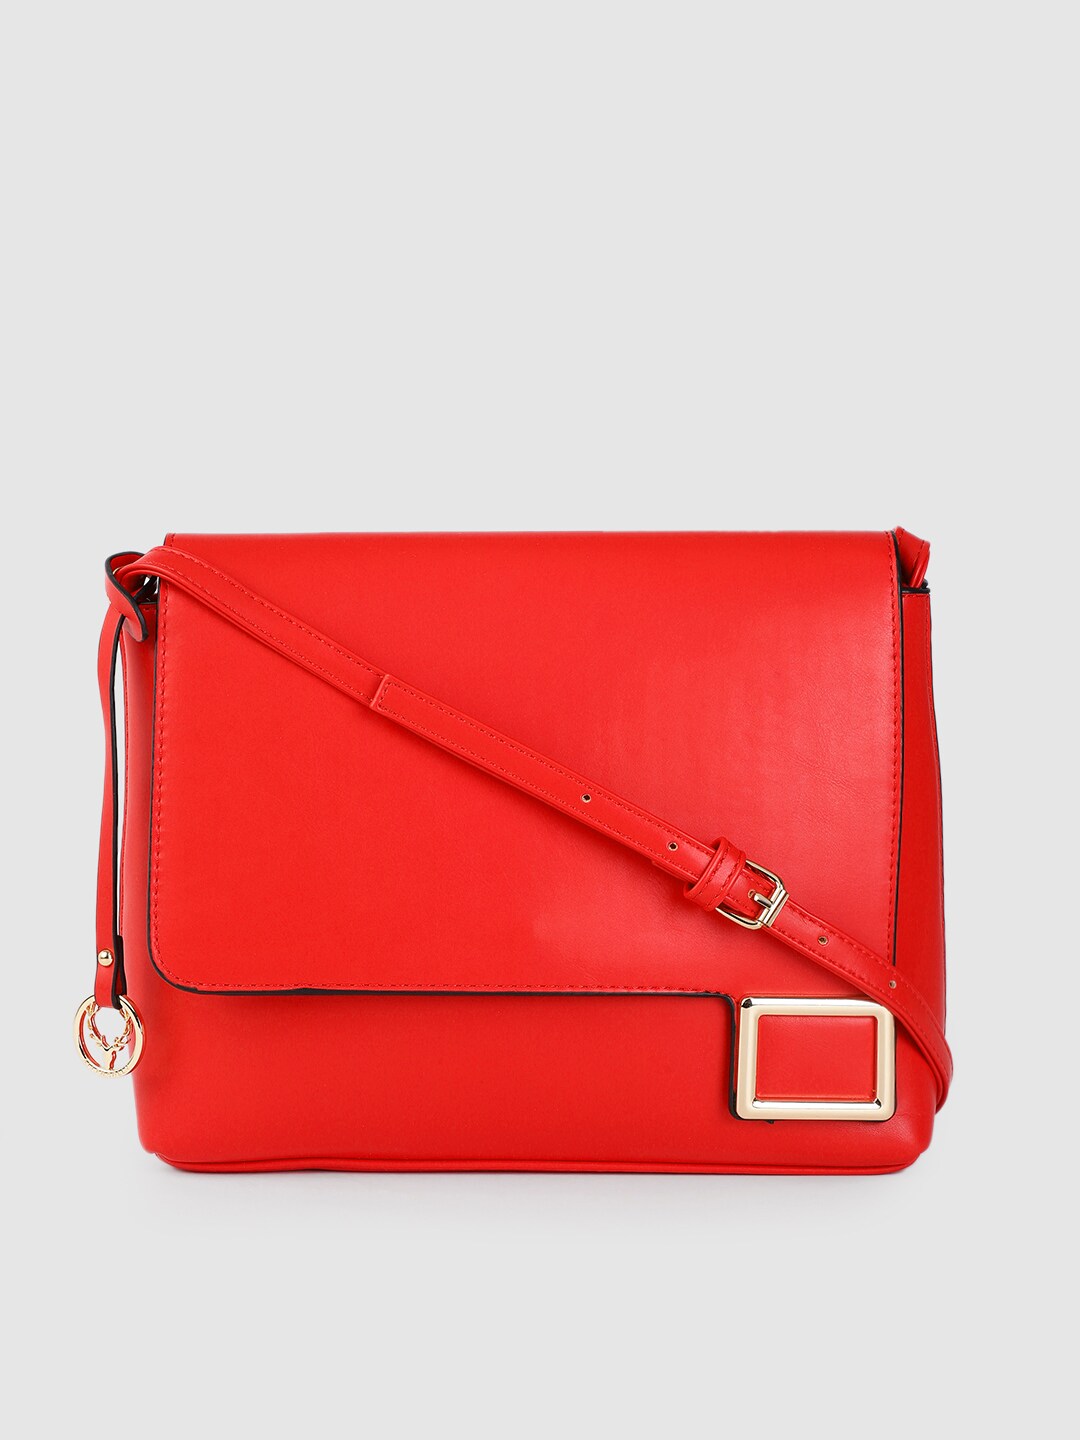 Allen Solly Women Red PU Structured Sling Bag Price in India